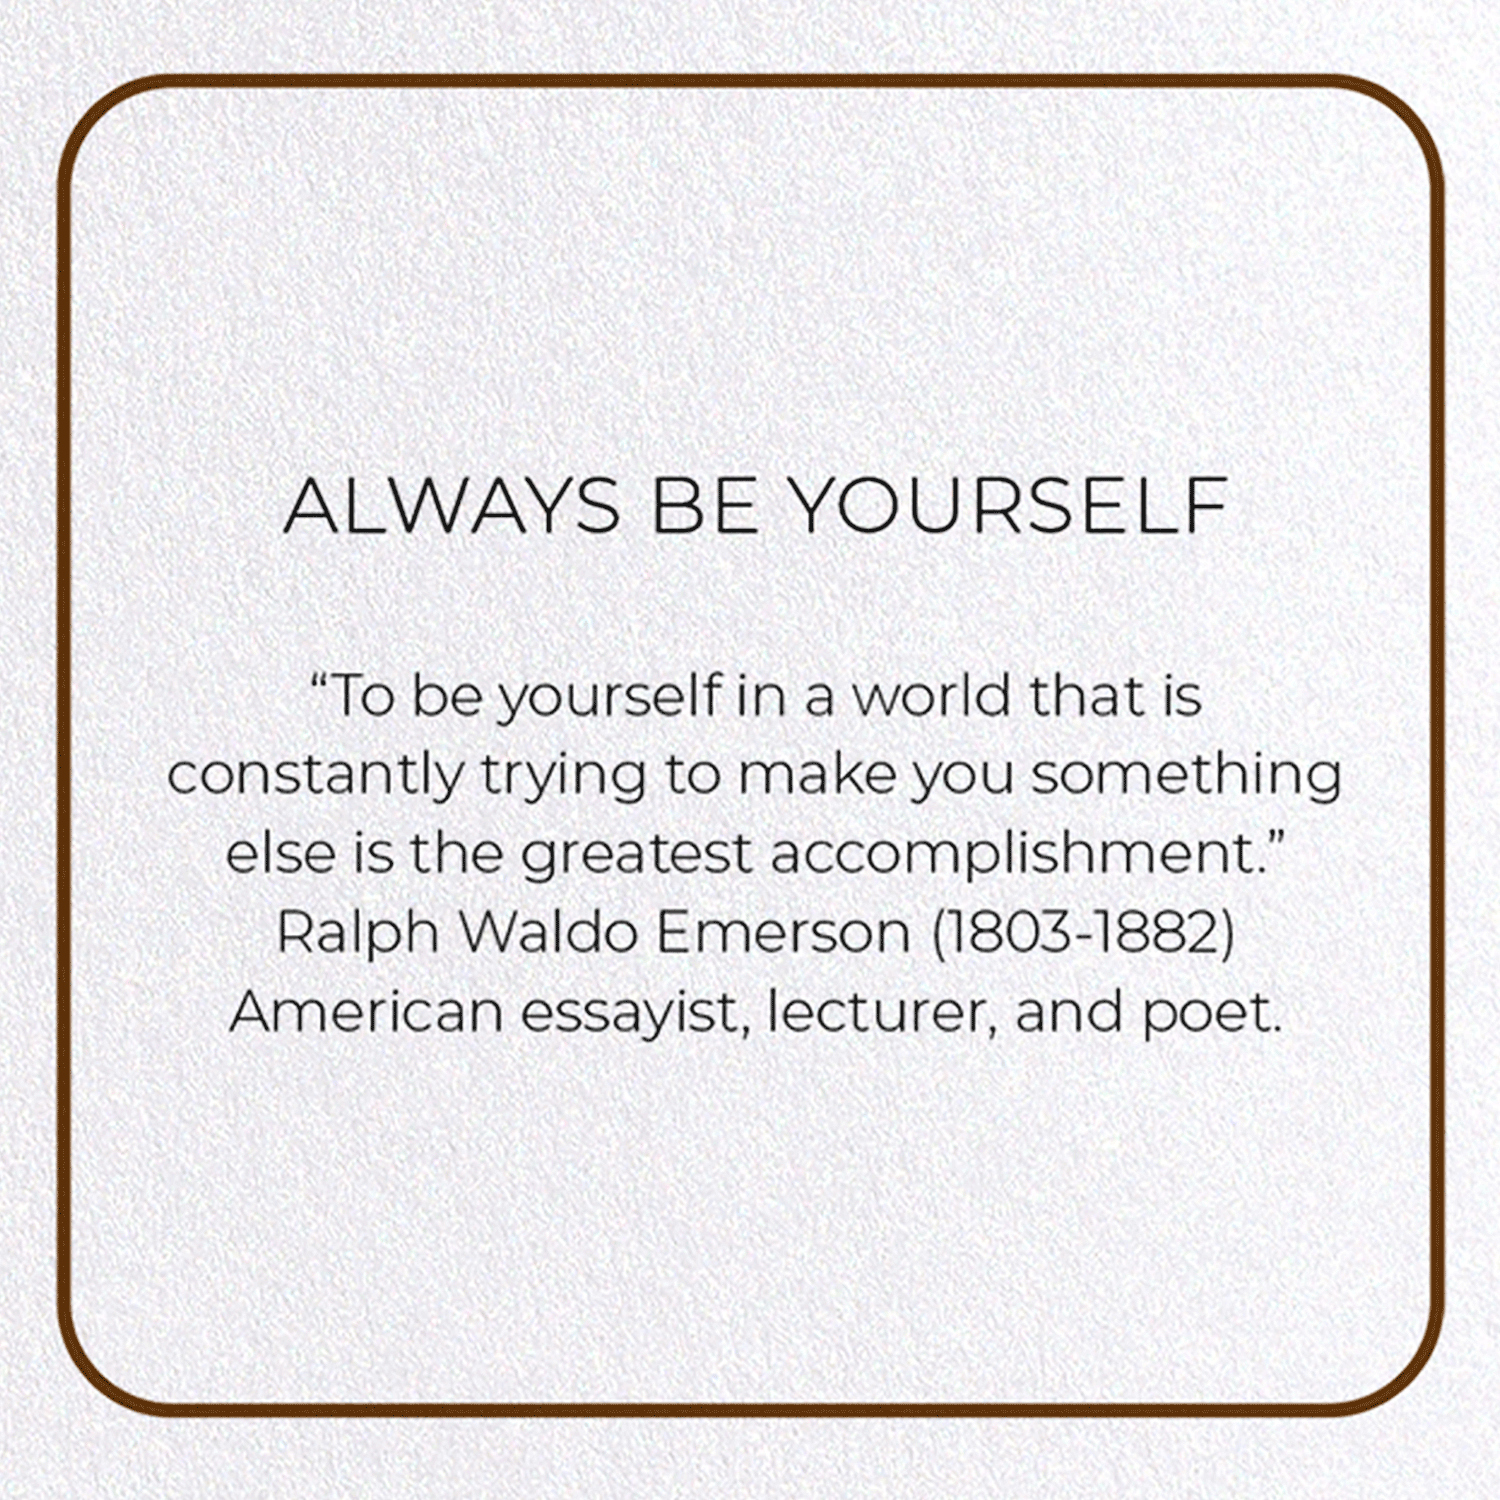 ALWAYS BE YOURSELF: Photo Greeting Card